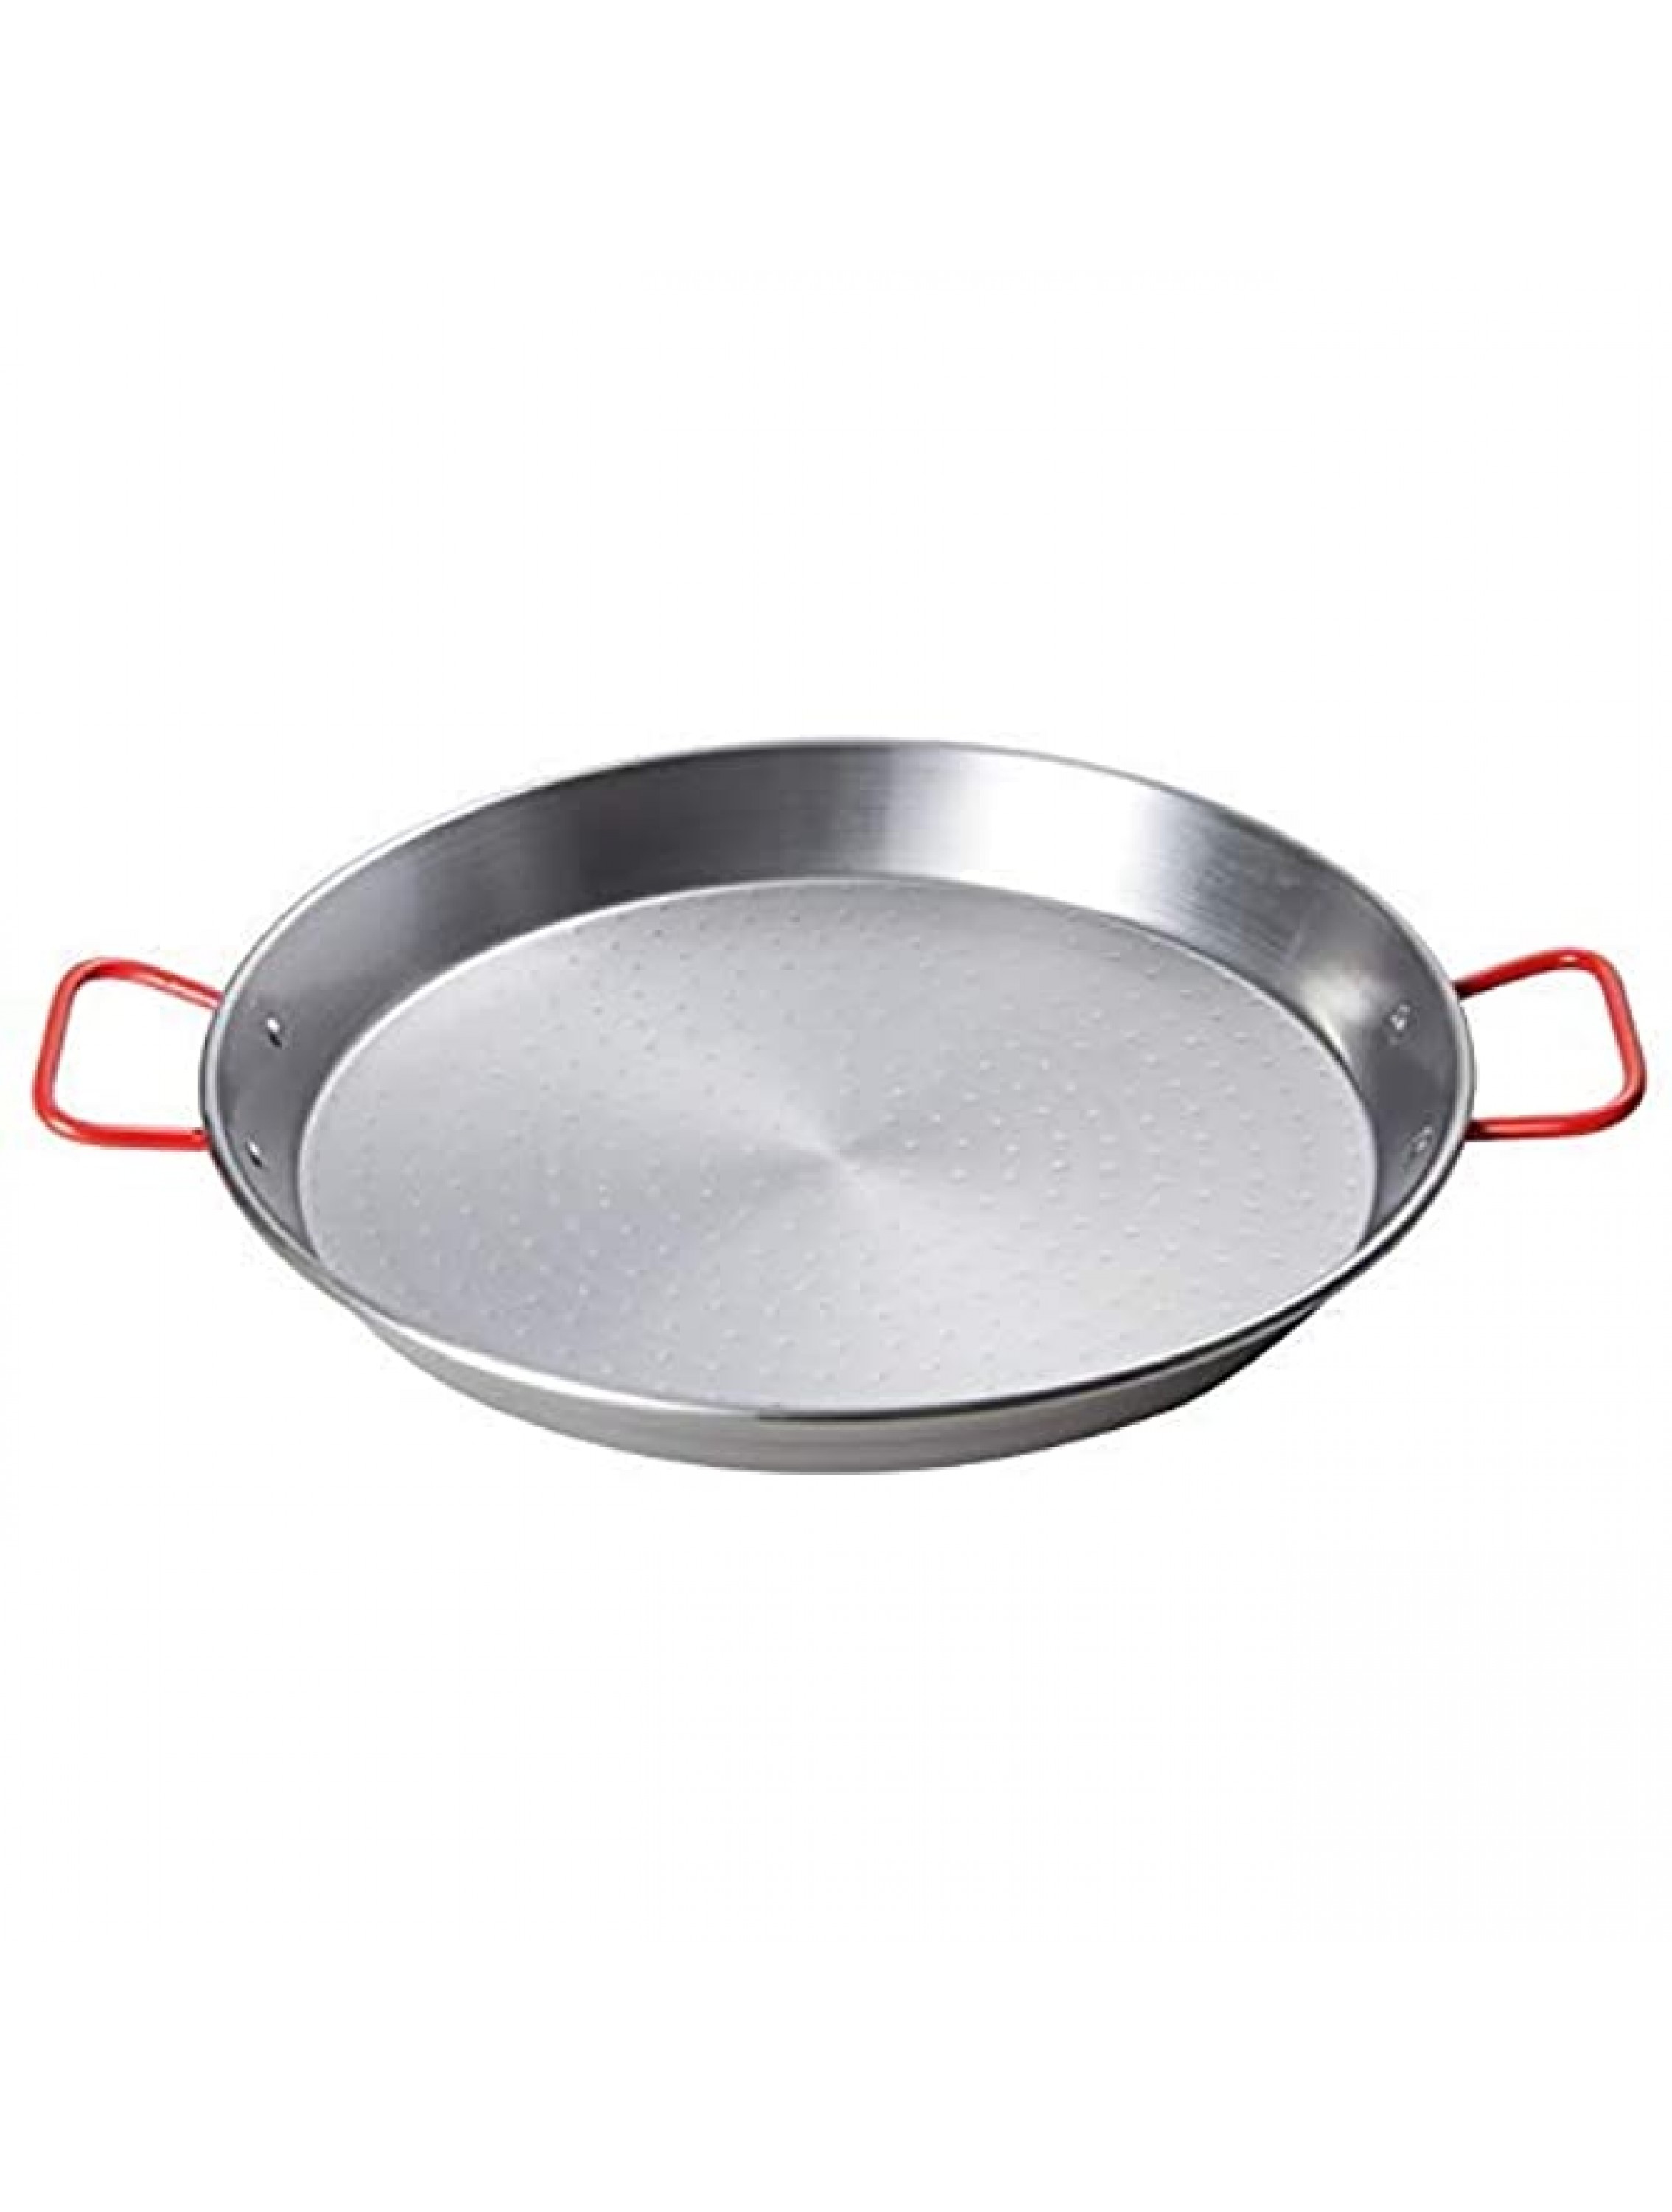 Winco CSPP-23 23-5 8 Paella Pan Polished Carbon Steel Spanish Mediterranean Food Fry Pan Spanish Frying Pan with Handles - BFR4E5Q4A